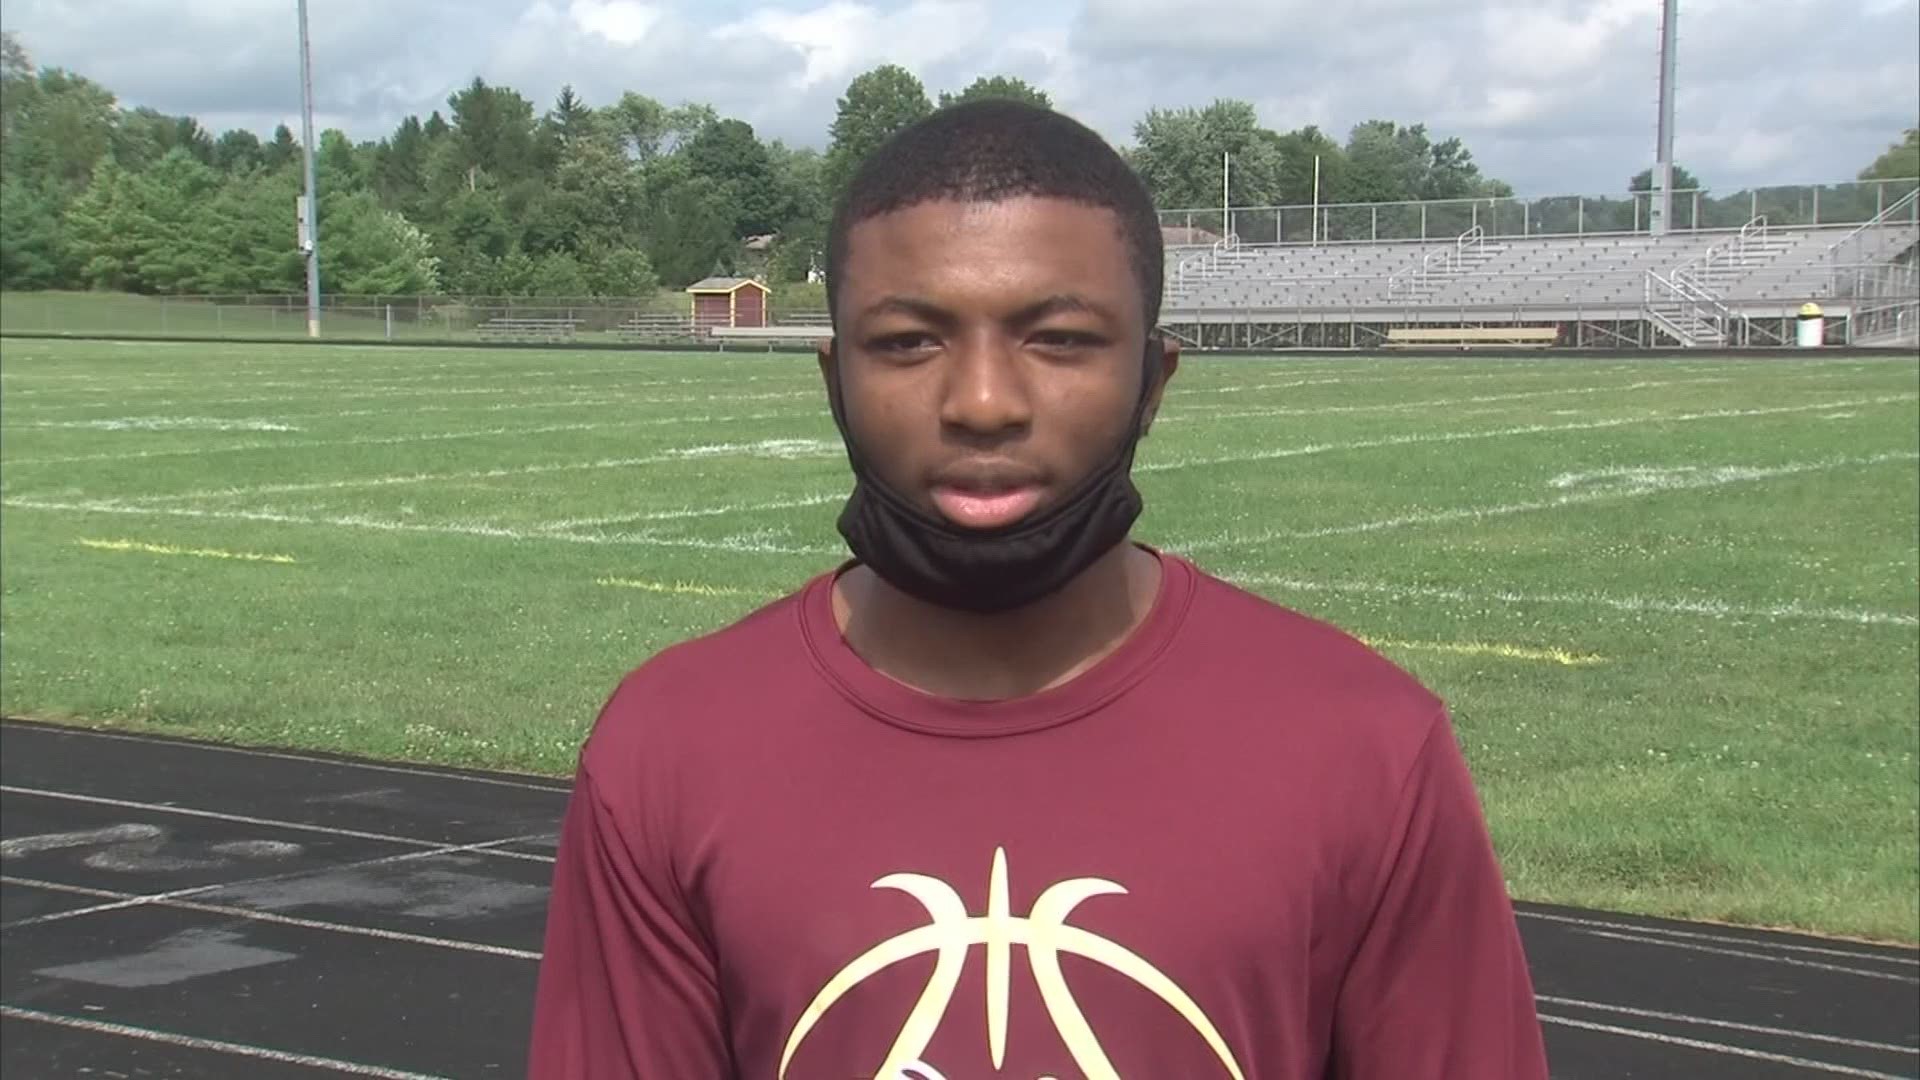 Caldwell is a sophomore at Licking Heights High School and is the quarterback of the football team.